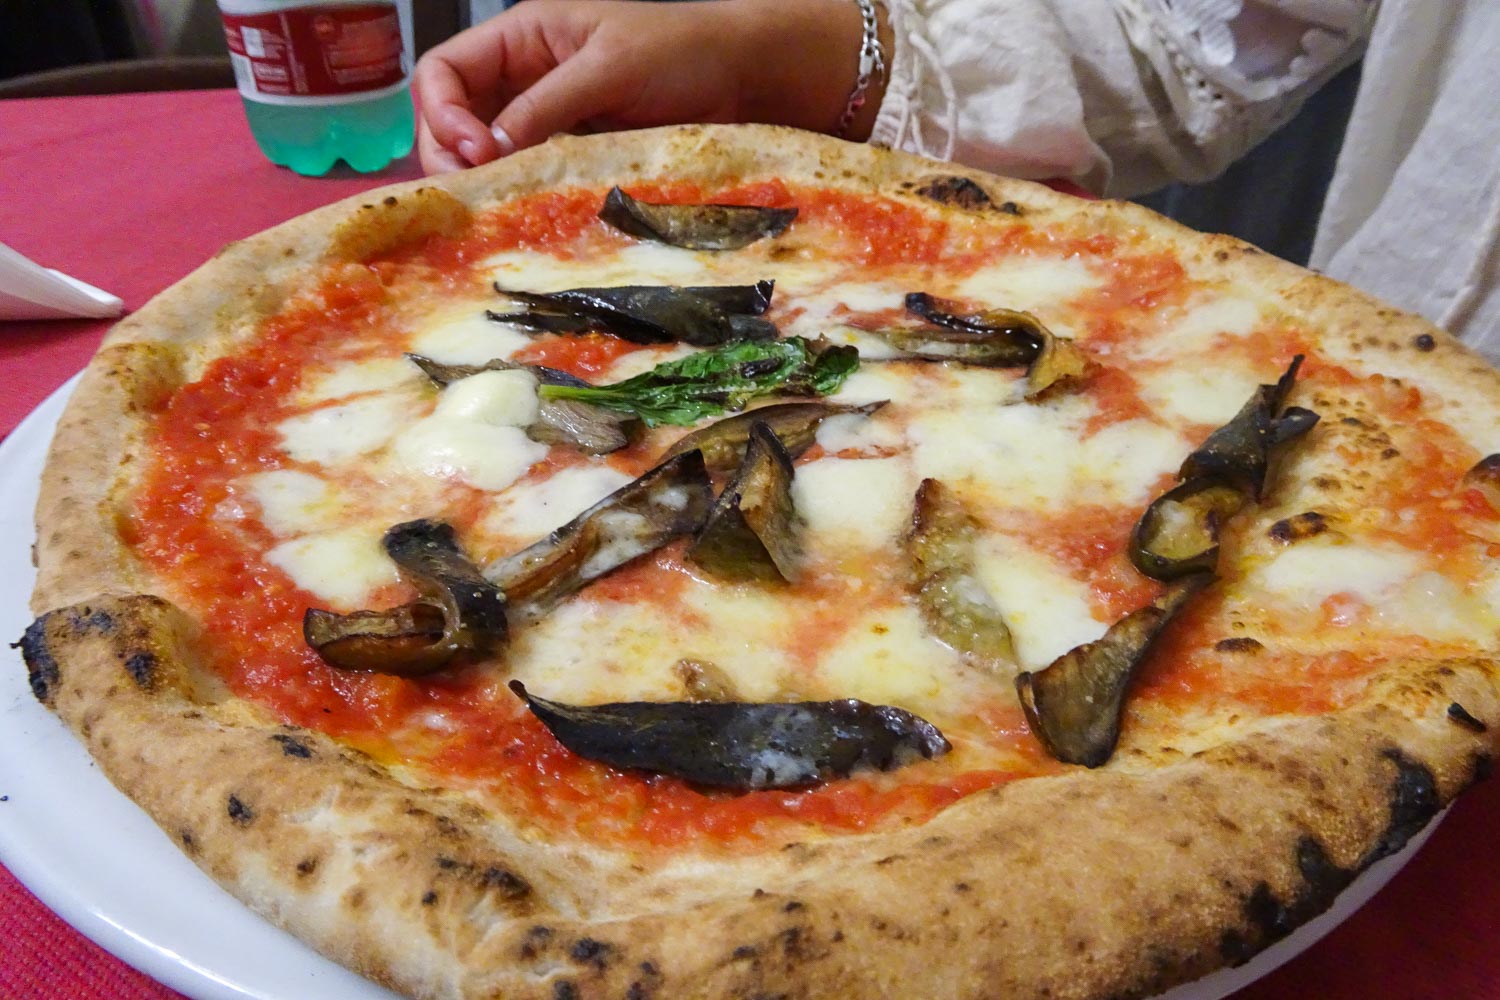 4.) Italy - If you aren't afraid of carbs, you can get simple vegetarian pizzas and pastas anywhere. 